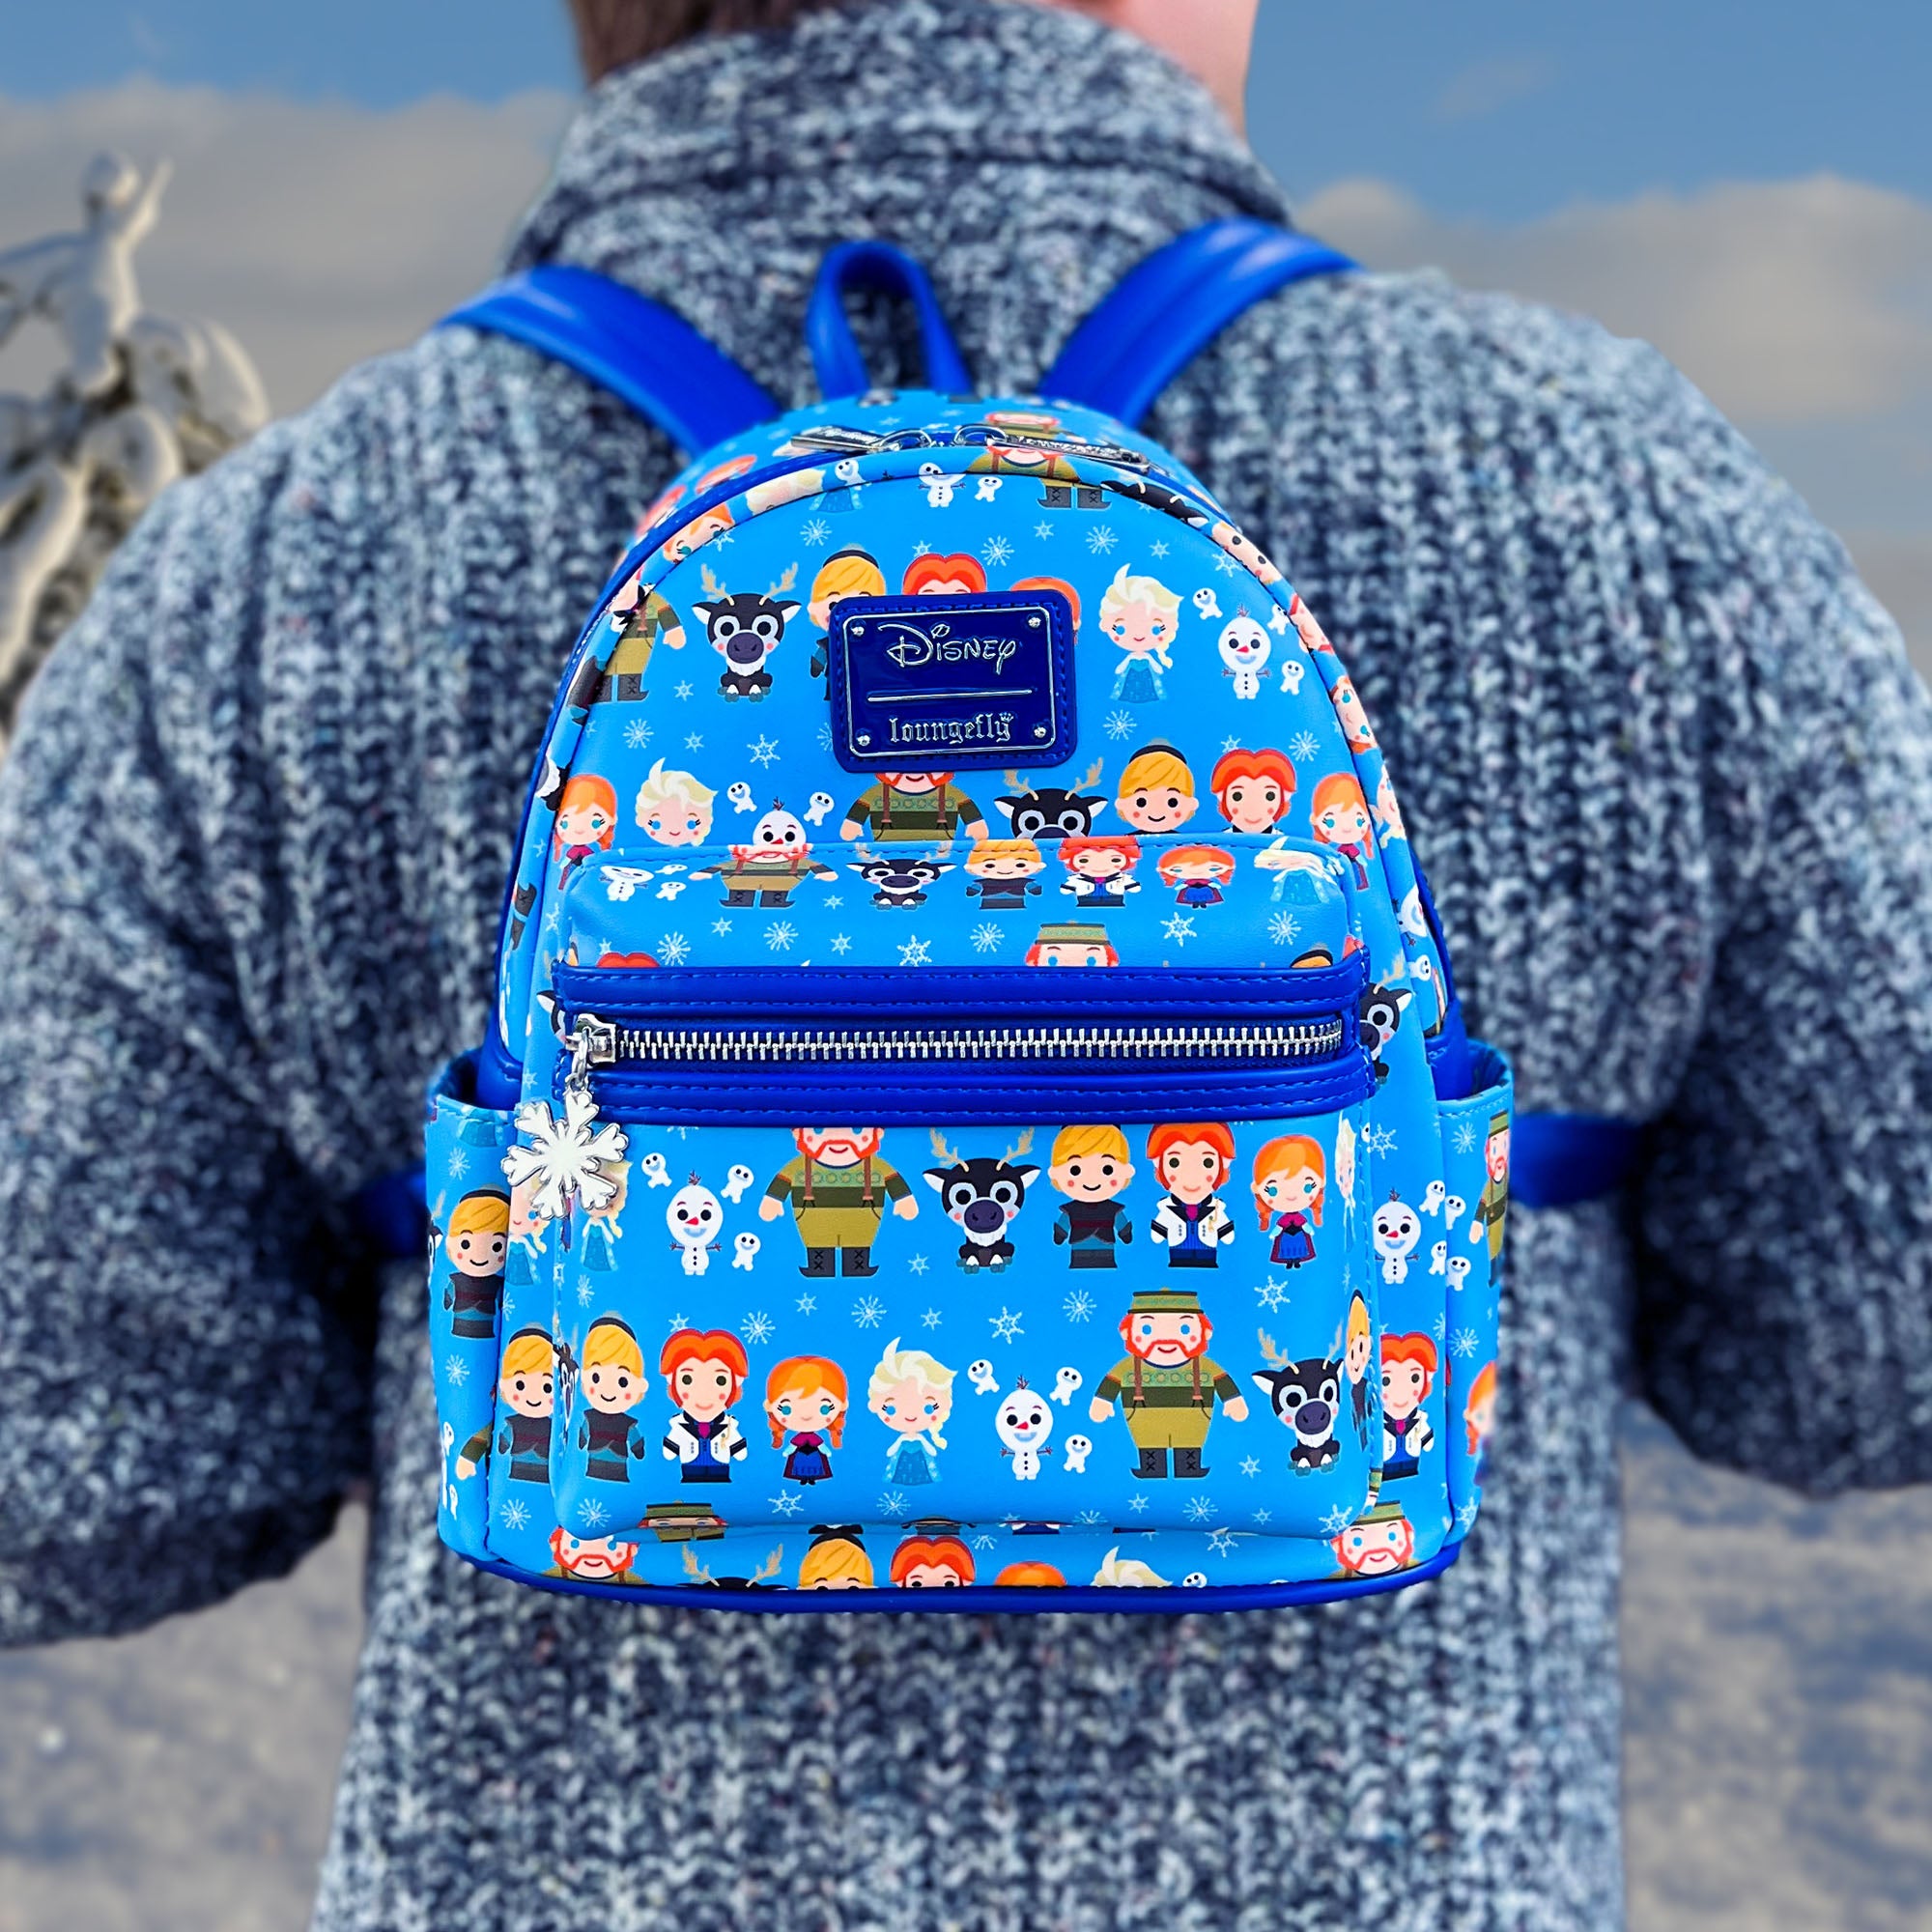 Collection Lounge Exclusive Loungefly Disney Frozen Chibi Mini Backpac